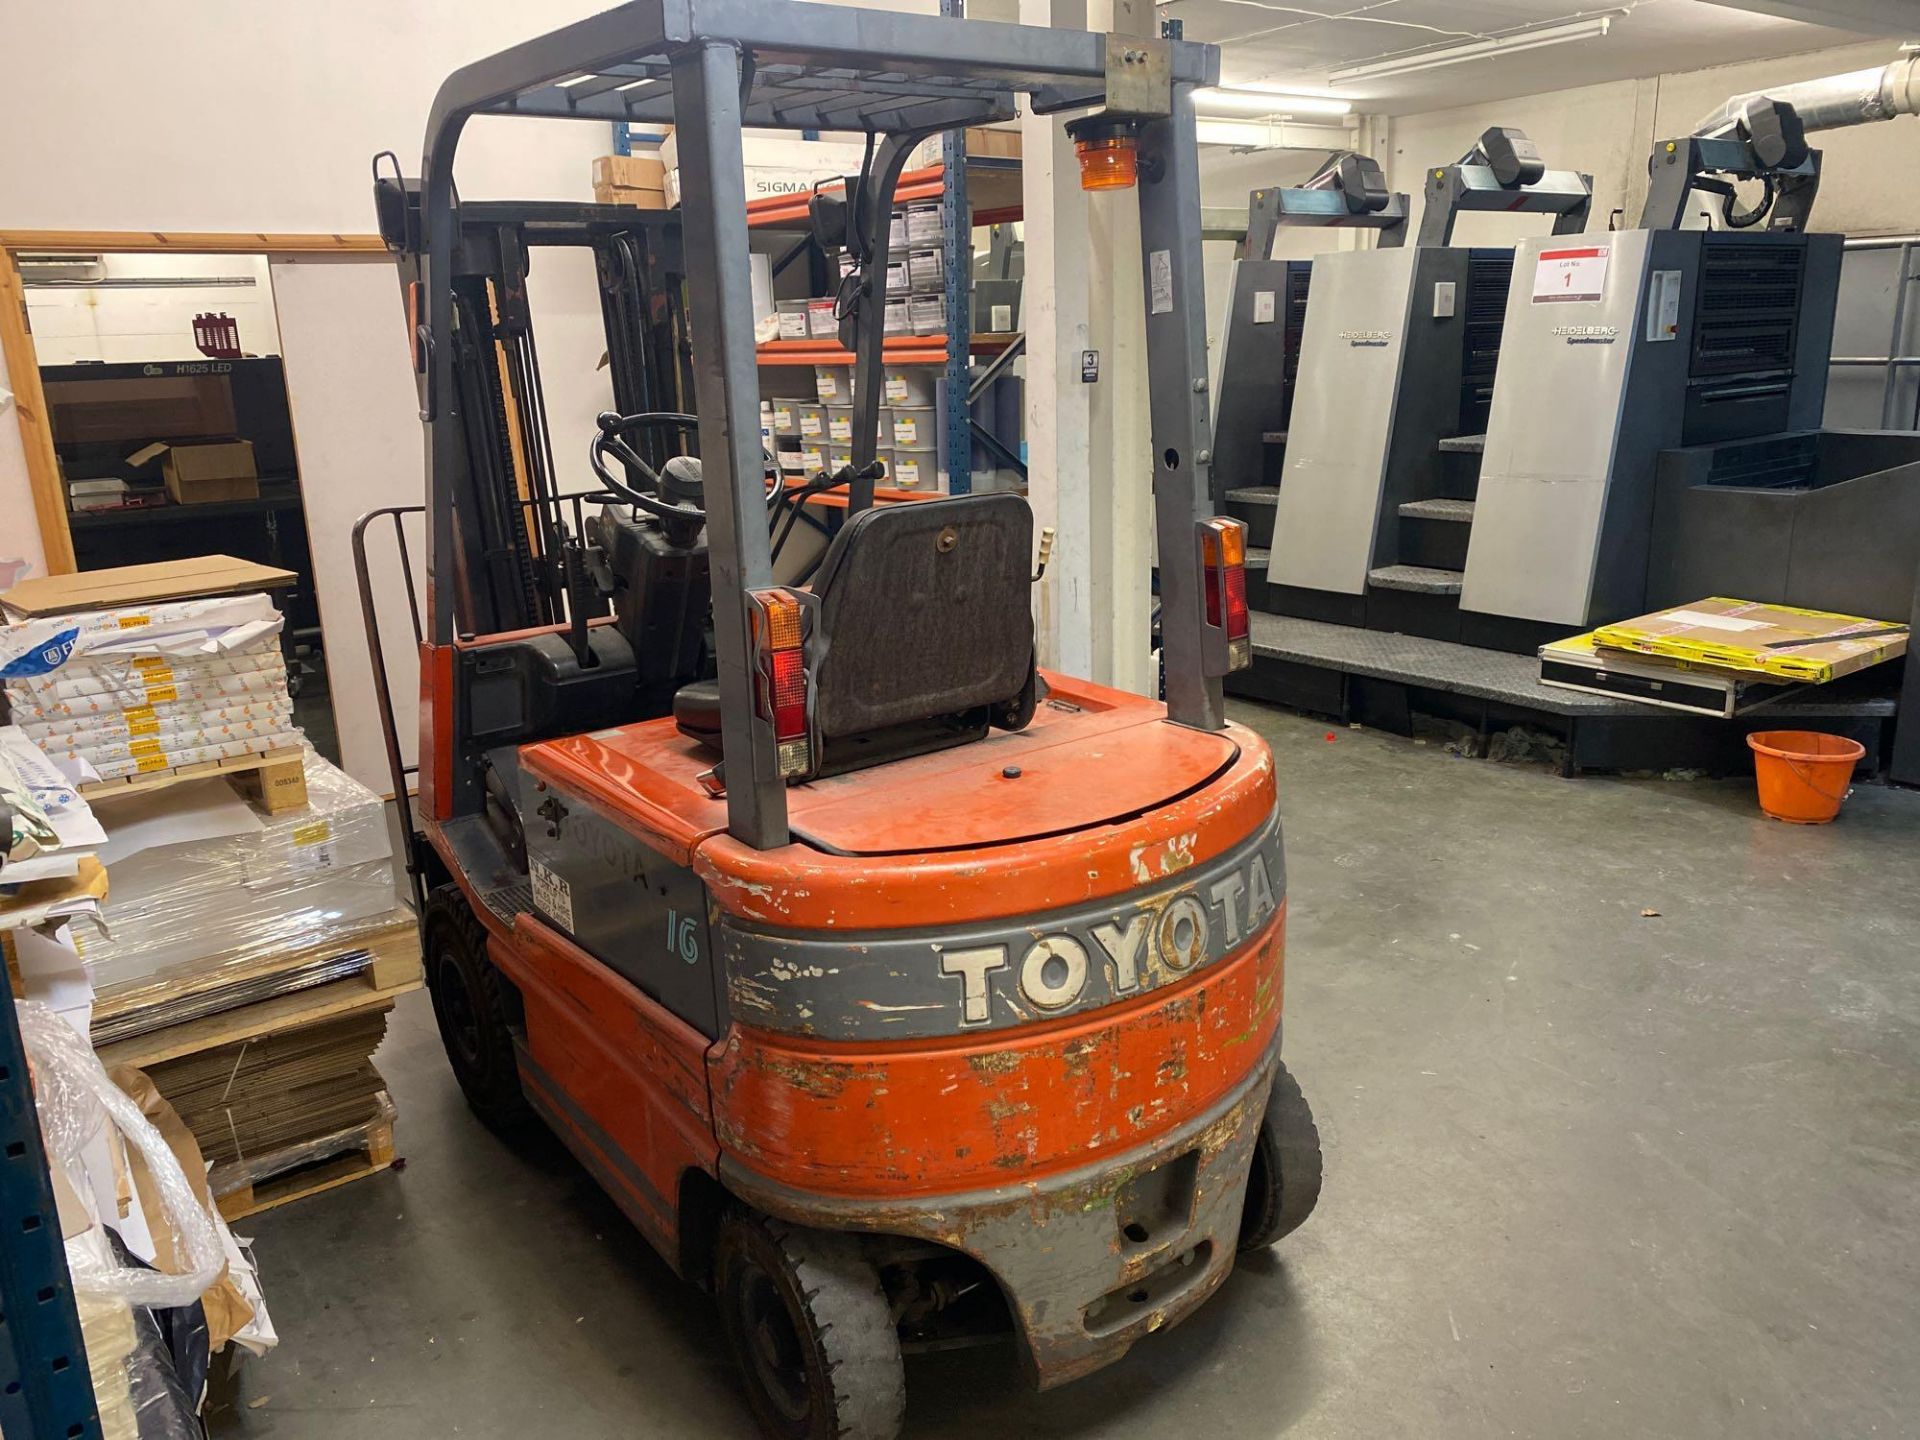 Toyota FBM 16 electric side shift forklift truck Lift capacity 1469 kg Lift height 3000 mm frame - Image 2 of 6